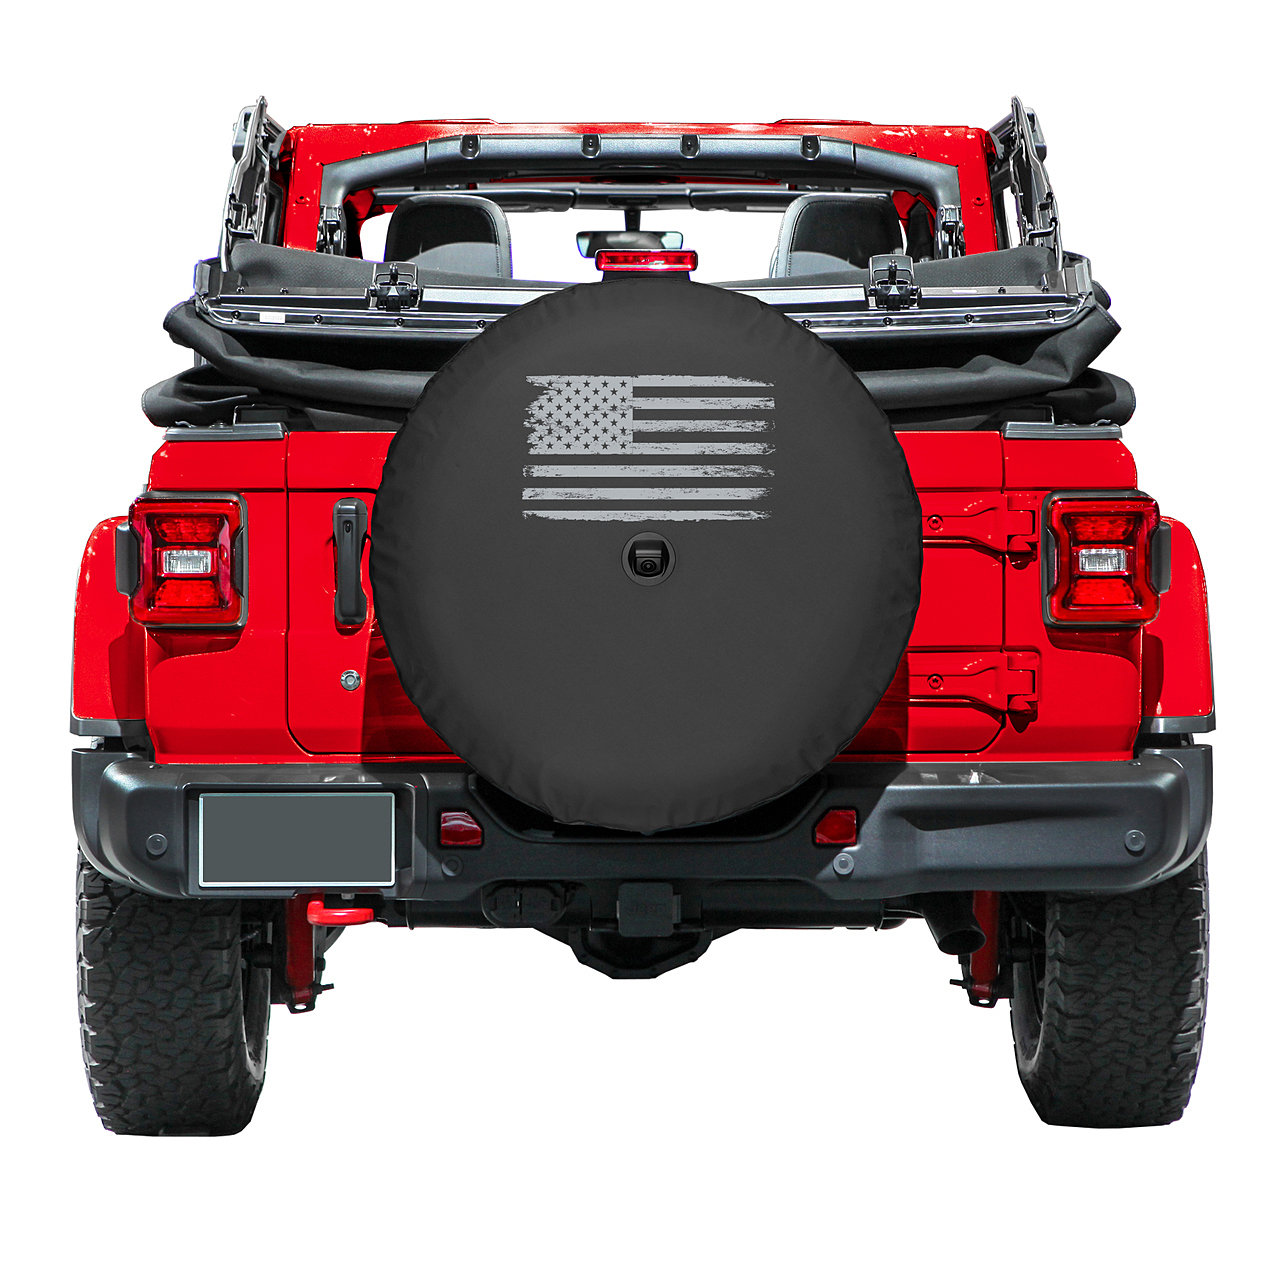 556 Gear Jeep Distressed American Flag Red White Blue USA Jeep RV Spare Tire Cover Black 35 in 